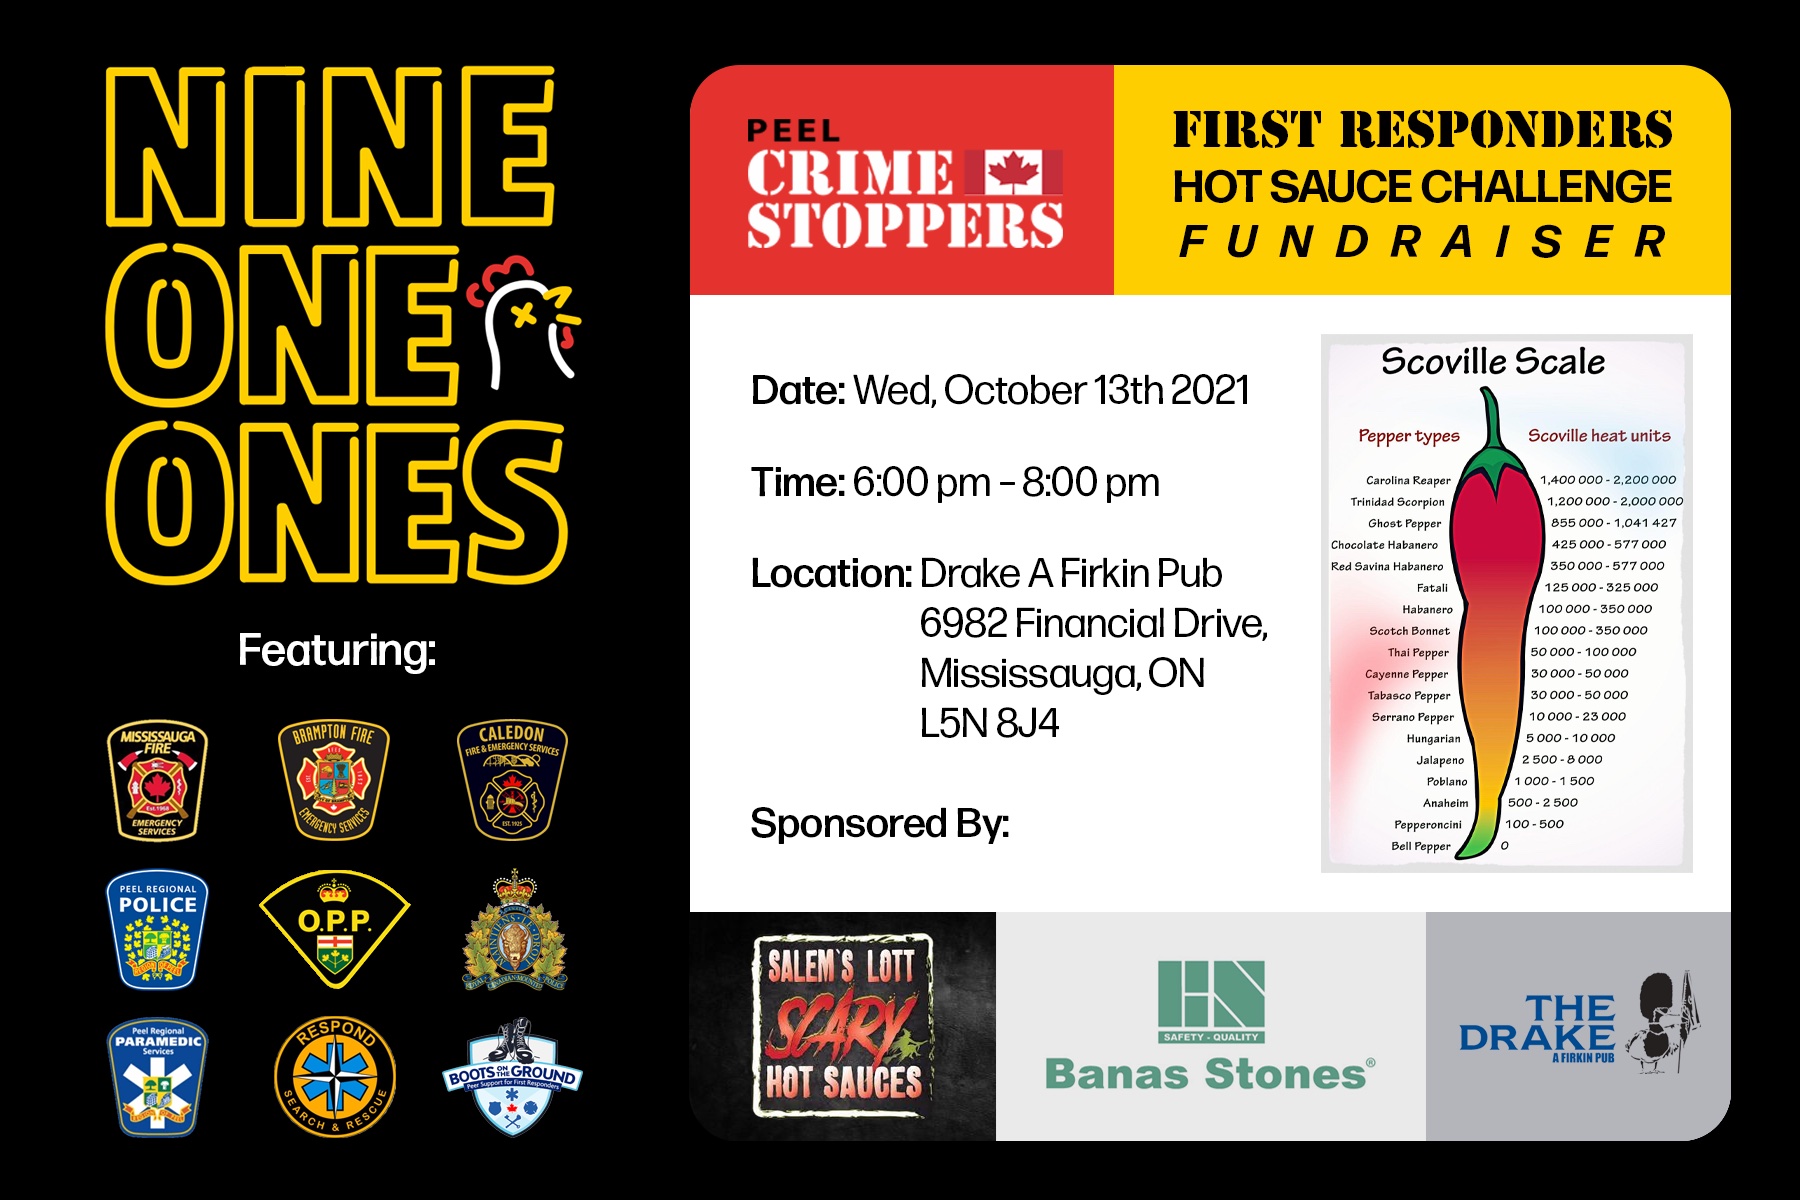 First Responders Hot Sauce Challenge - Peel Crime Stoppers